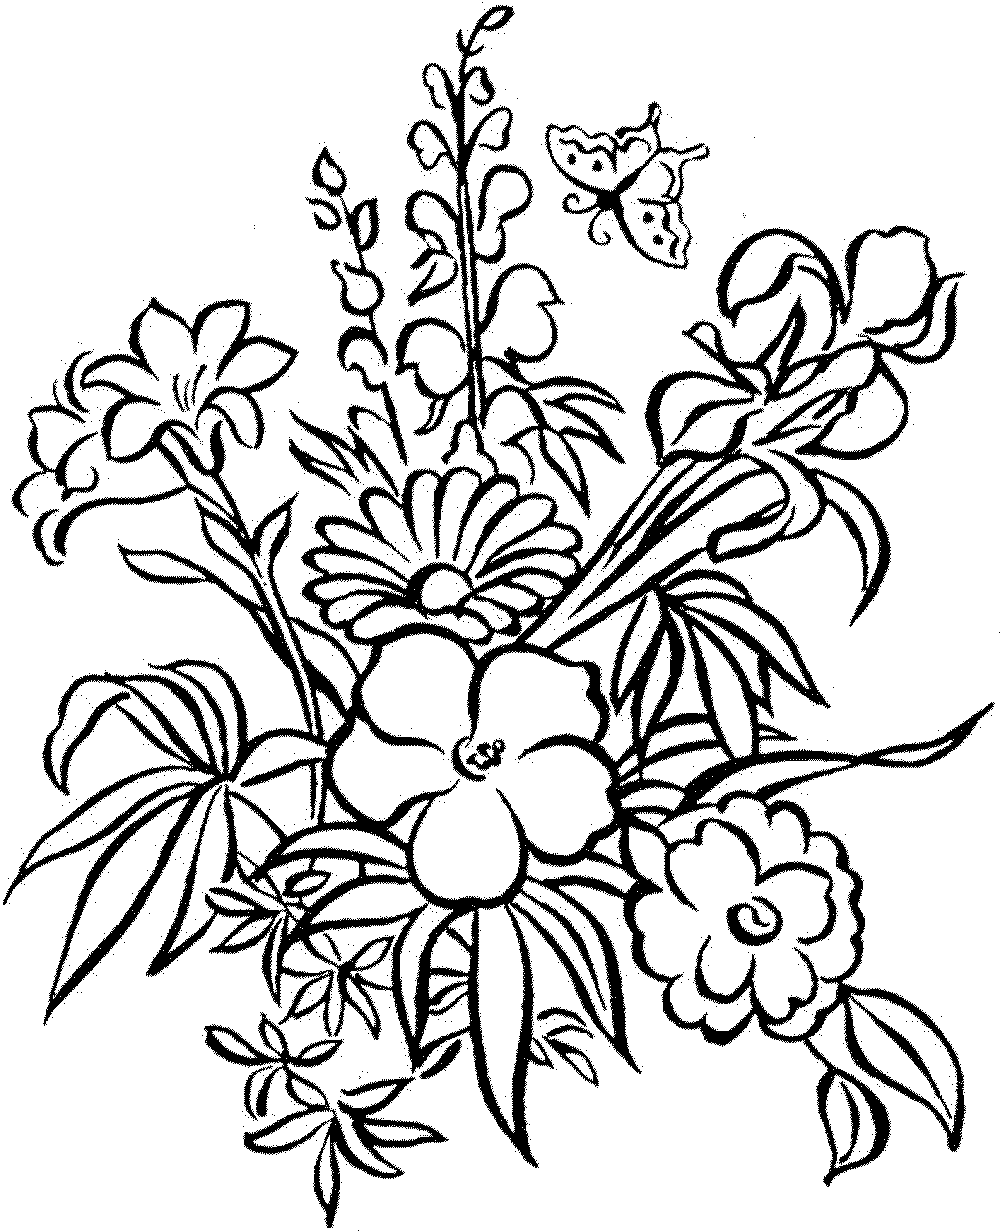 Cartoon Flower Coloring Pages To Print with simple drawing